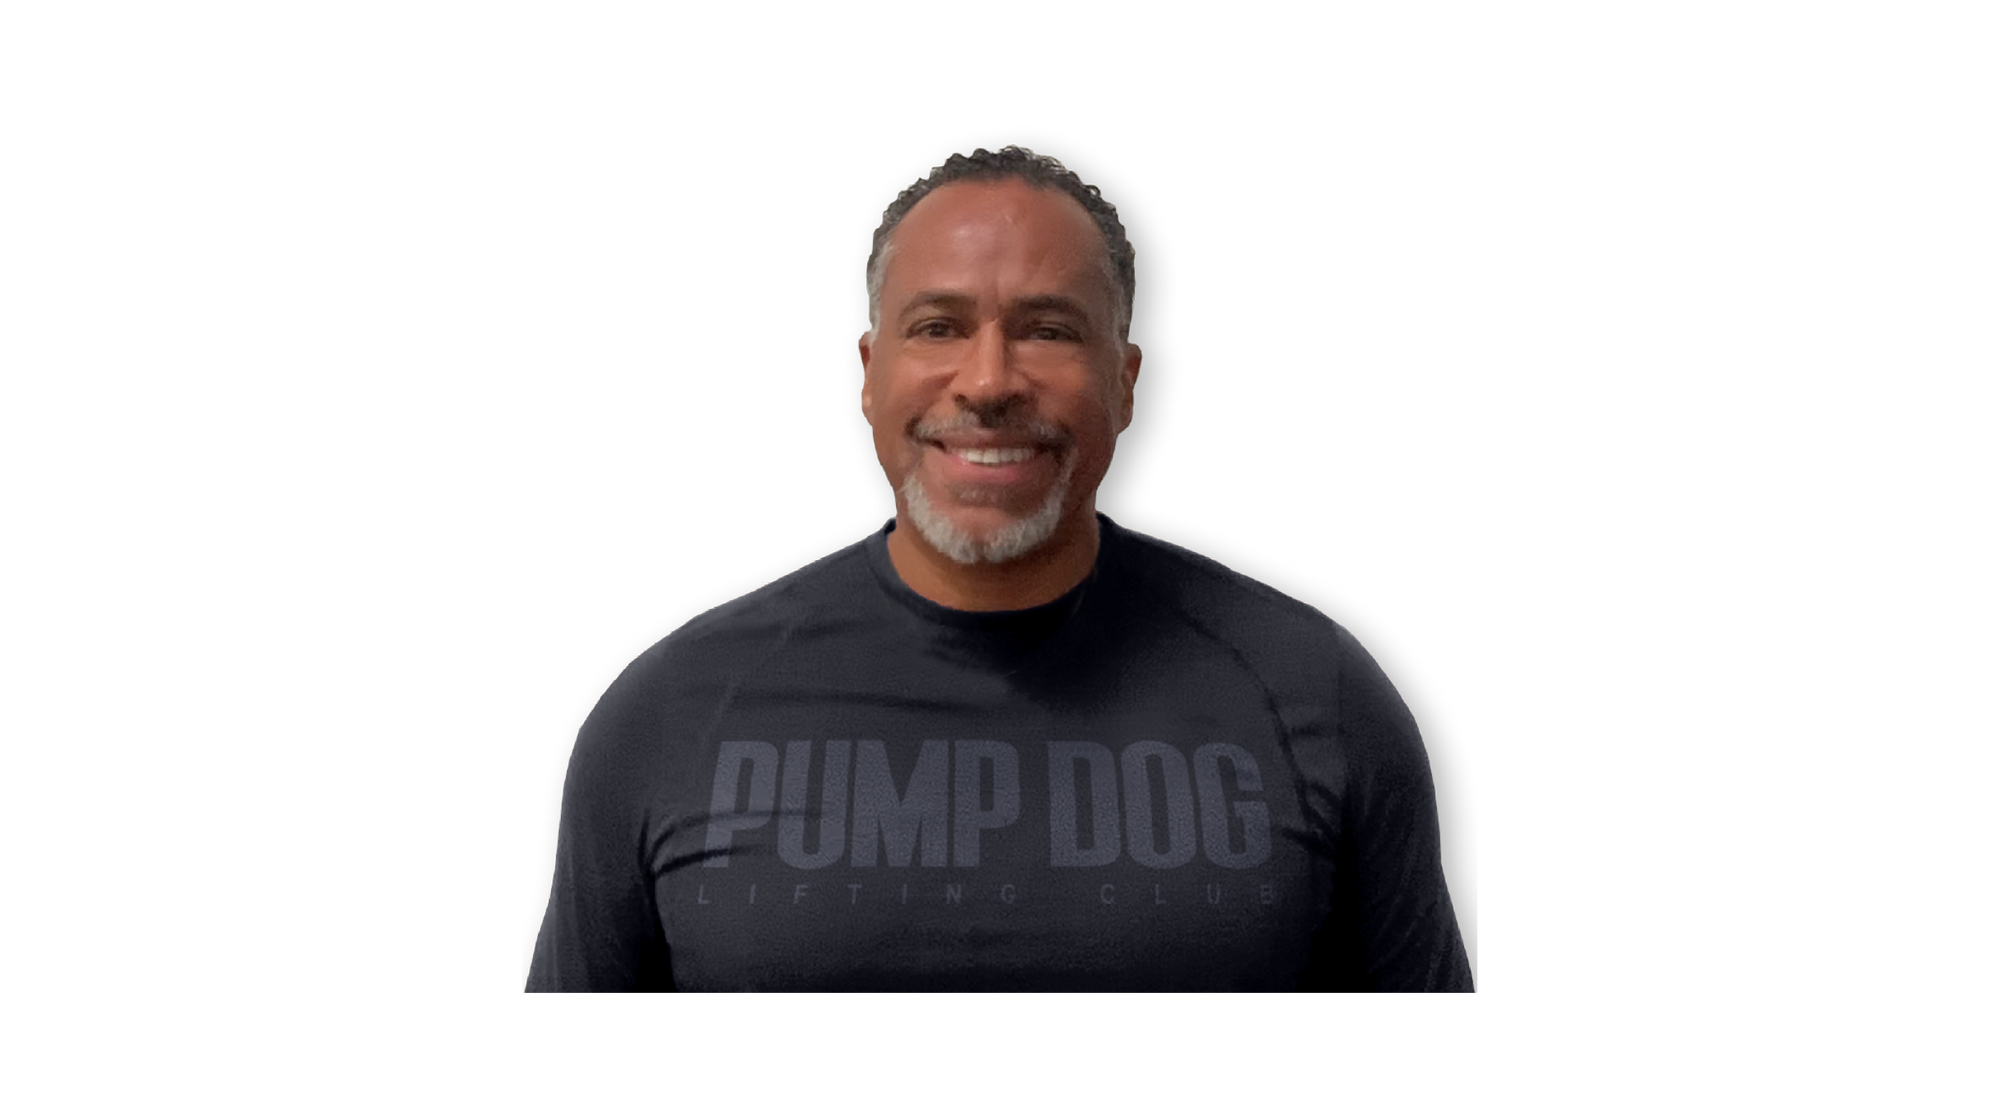 Created To Be Physical - Pump Dog Performance Apparel